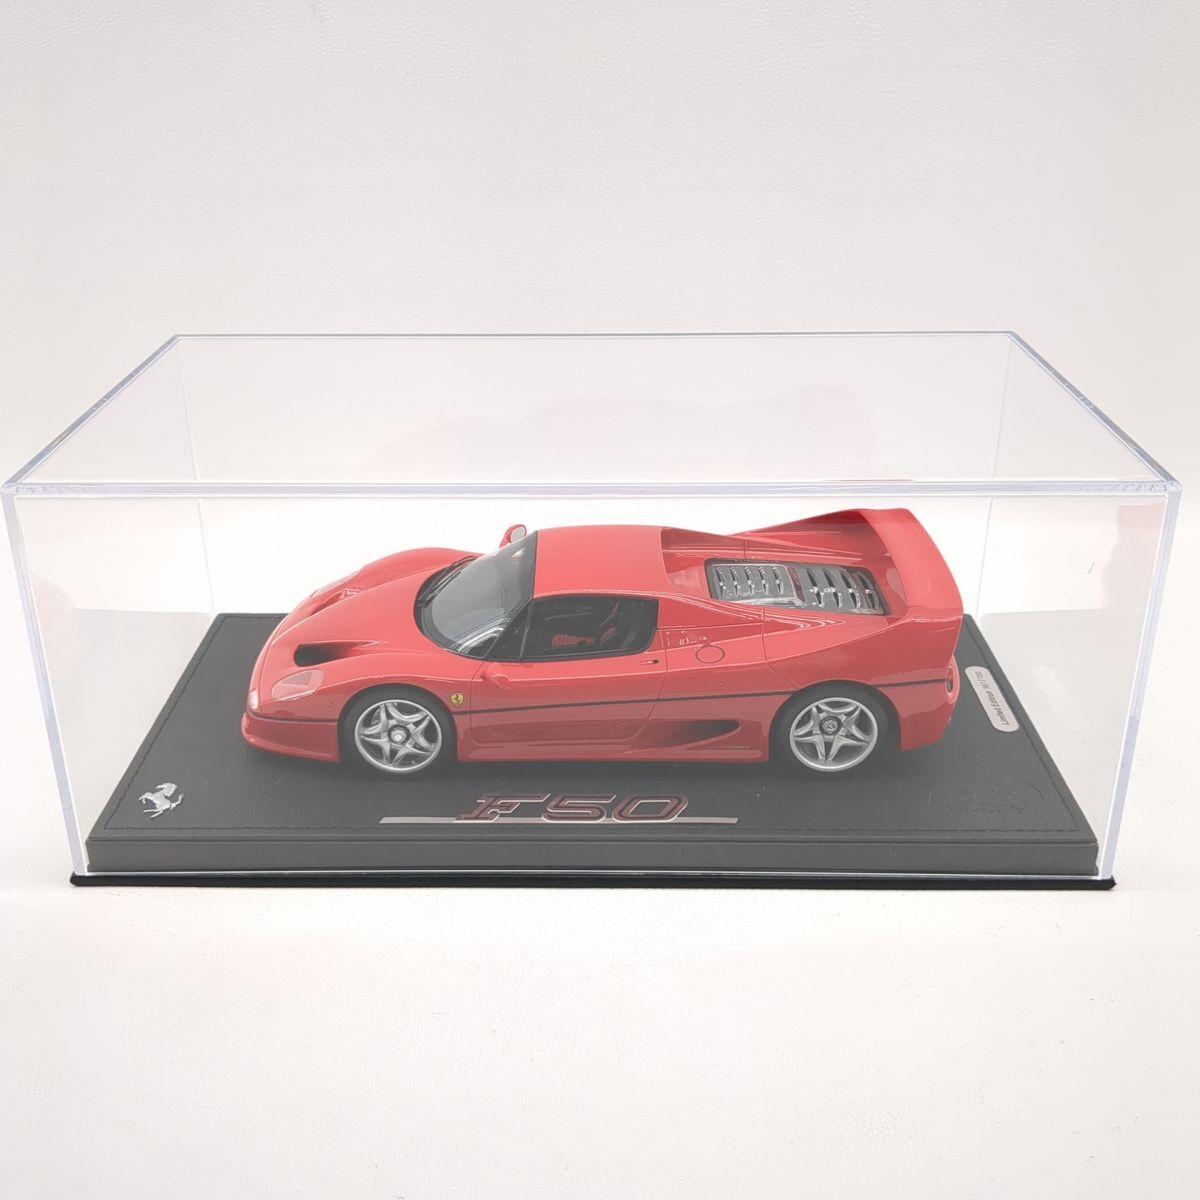 BBR MODELS　P18189A　フェラーリ　F50　Coupe　Rosso Corsa 322　レッド　1/18　ミニカー　700台限定　クリアケース付き　◆3109/宮竹店_画像10